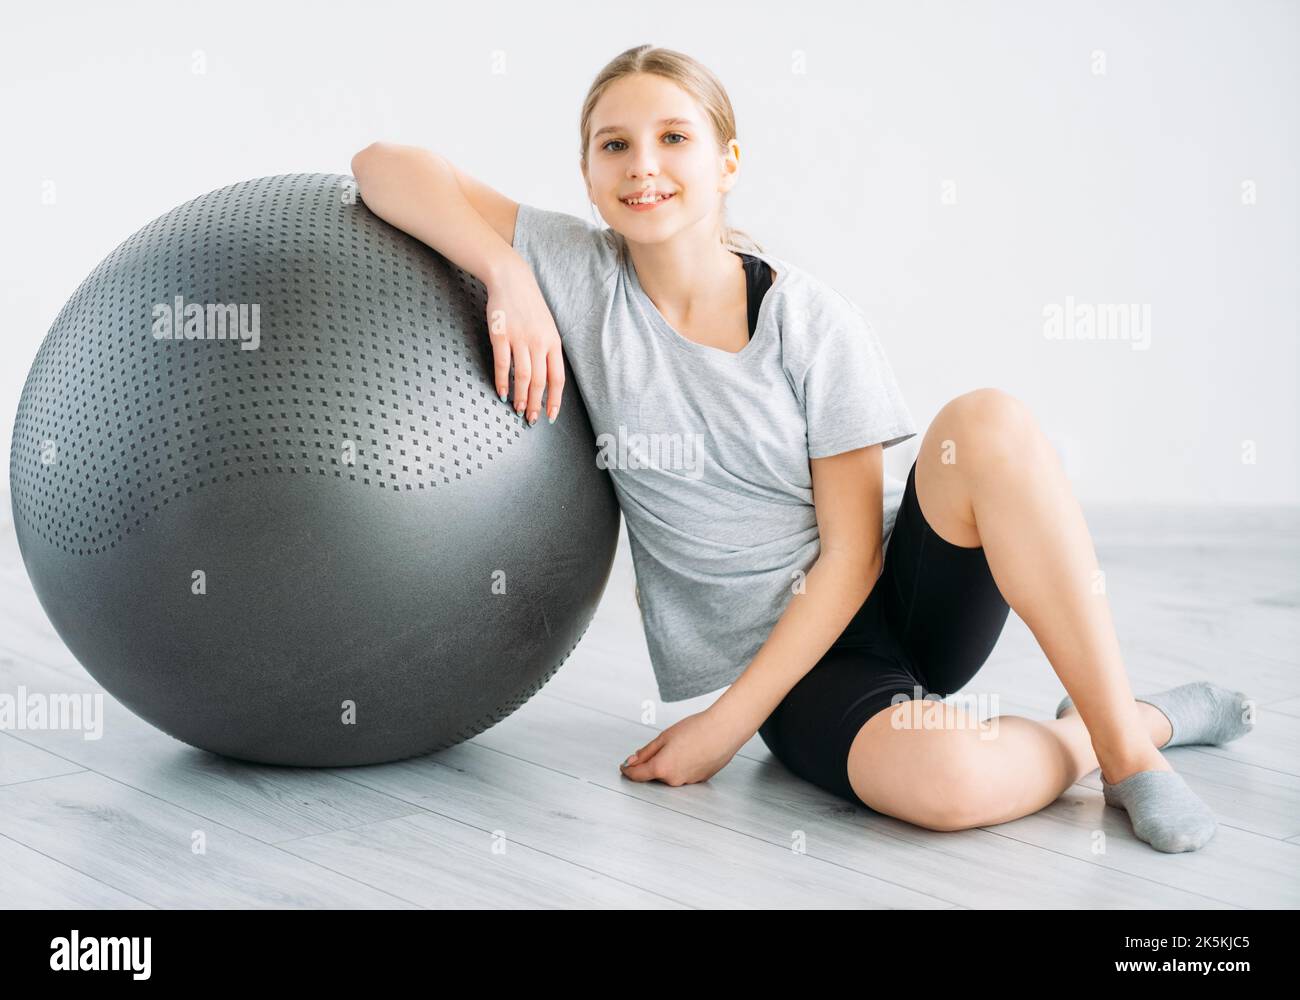 fitness equipment sport indoors girl with gym ball Stock Photo